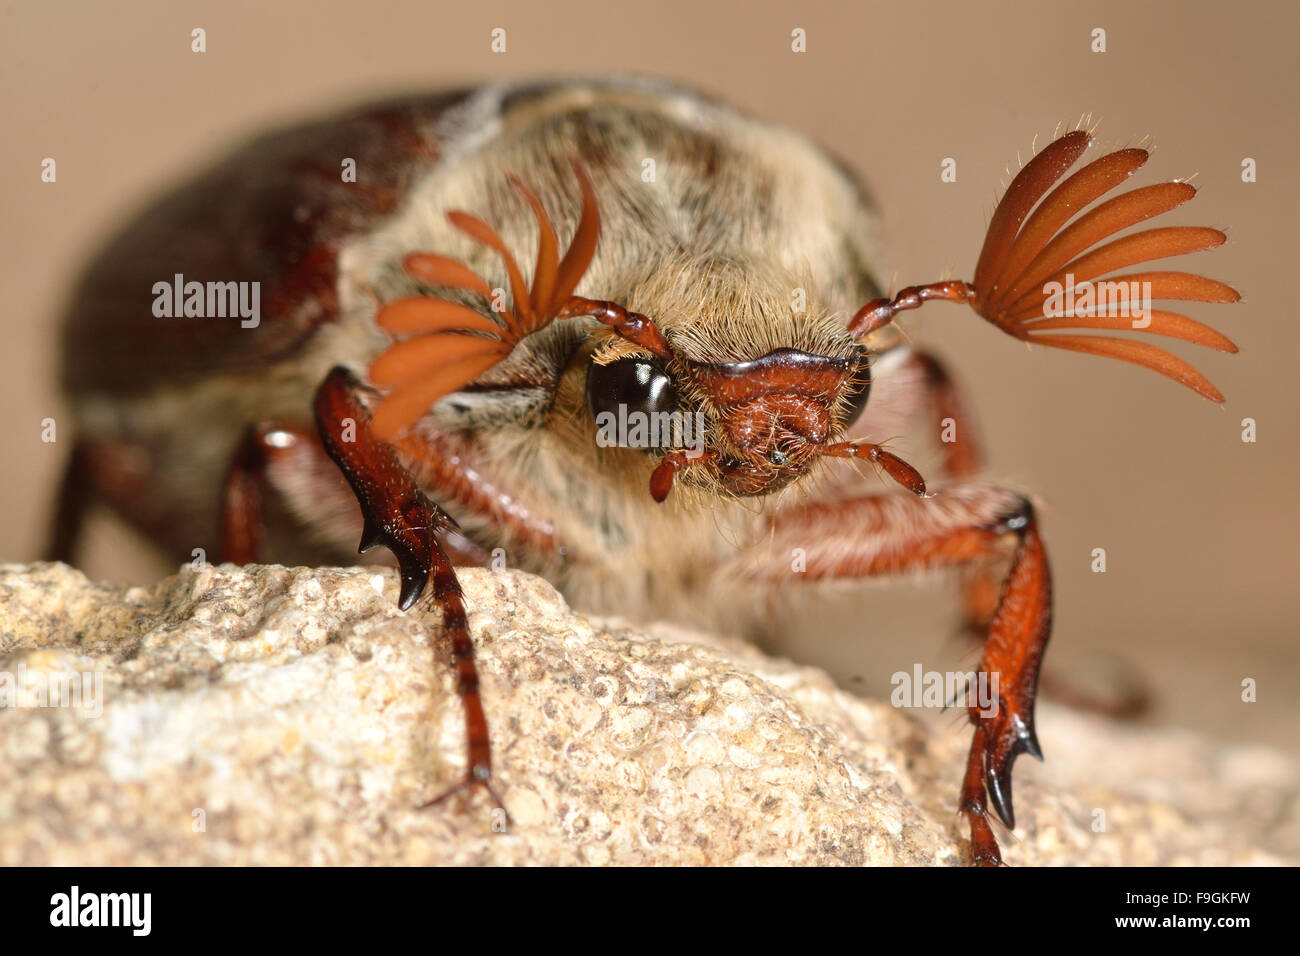 Cockchafer (Melolontha melolontha)  with antennae spread. A head-on photograph of a cockchafer beetle covered in hair Stock Photo